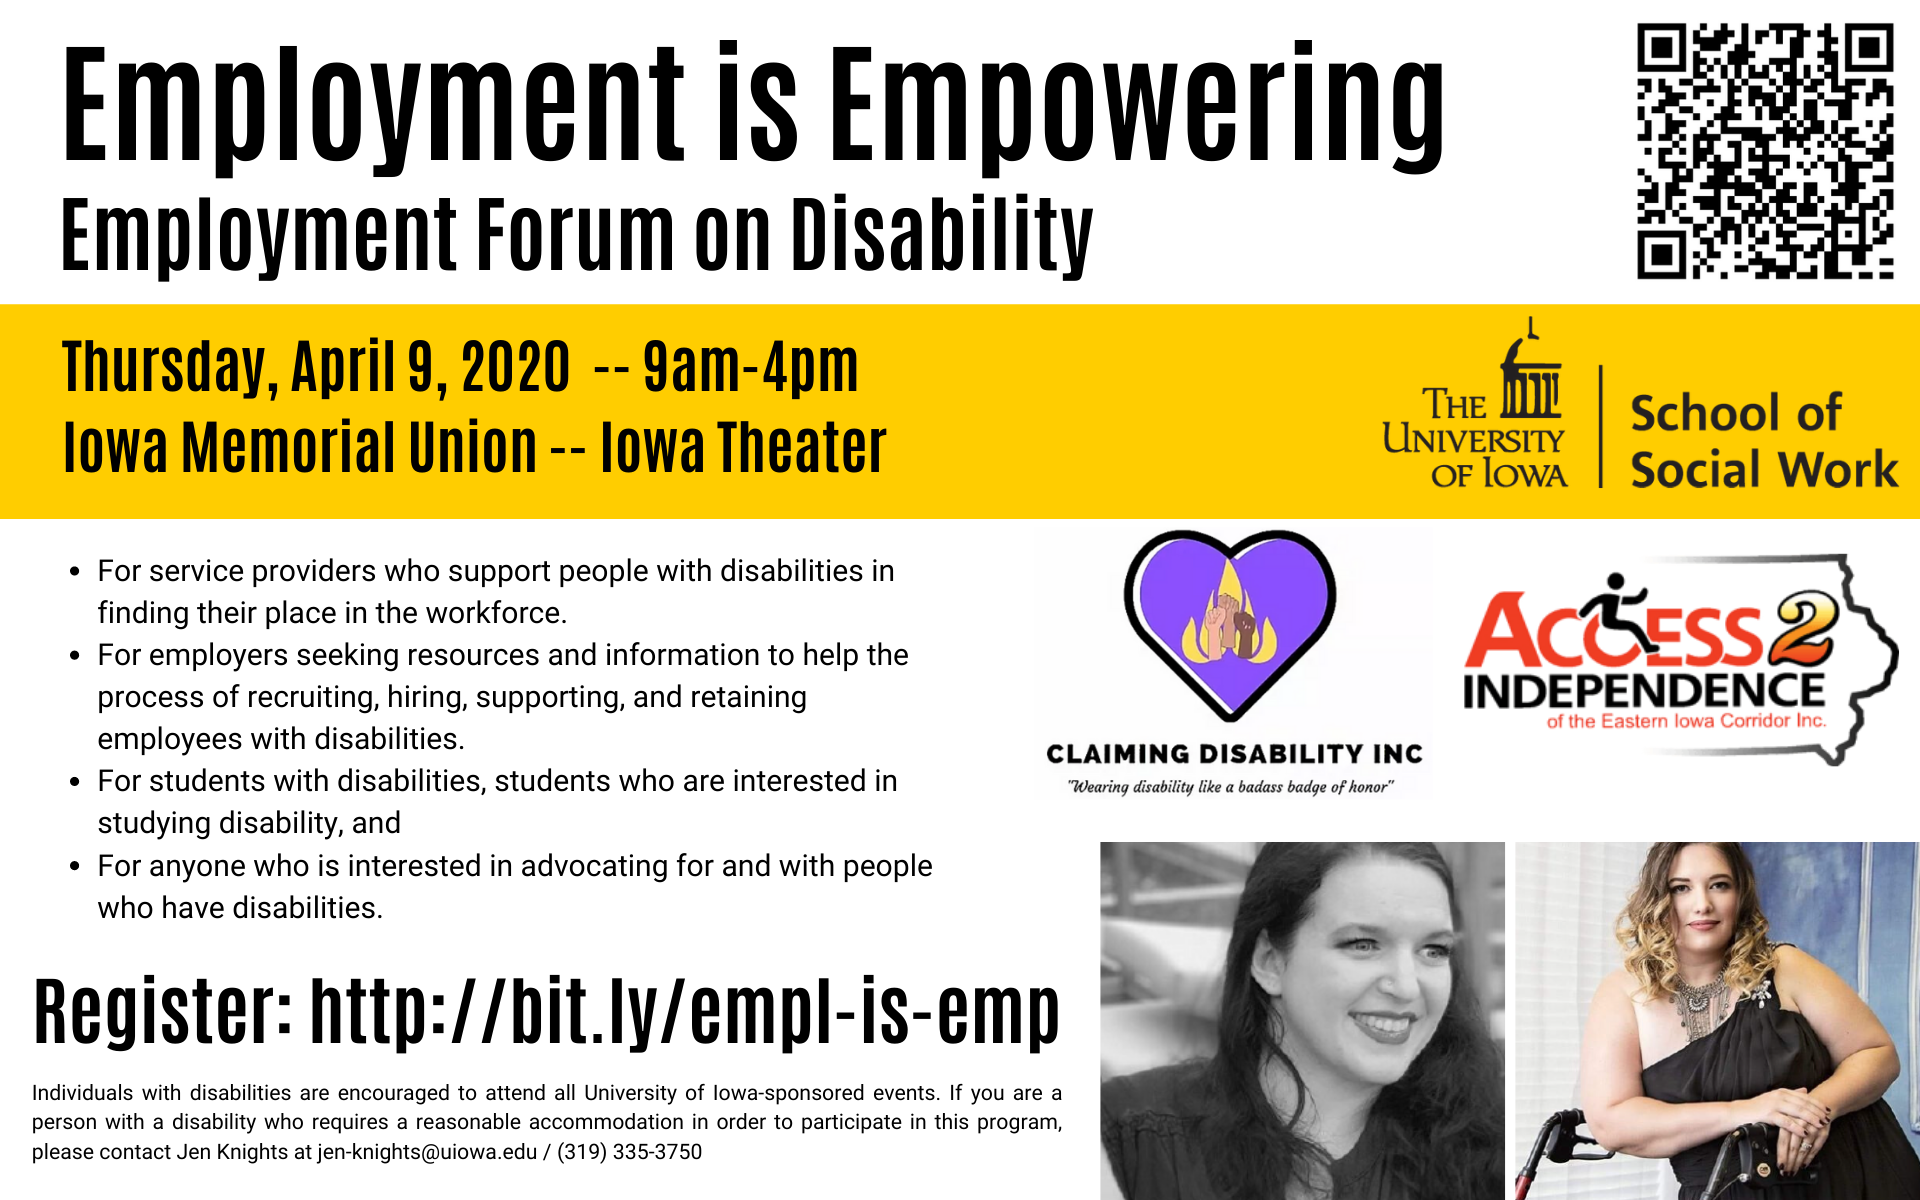 Employment Is Empowering disability and employment conference. April 9 at the IMU.